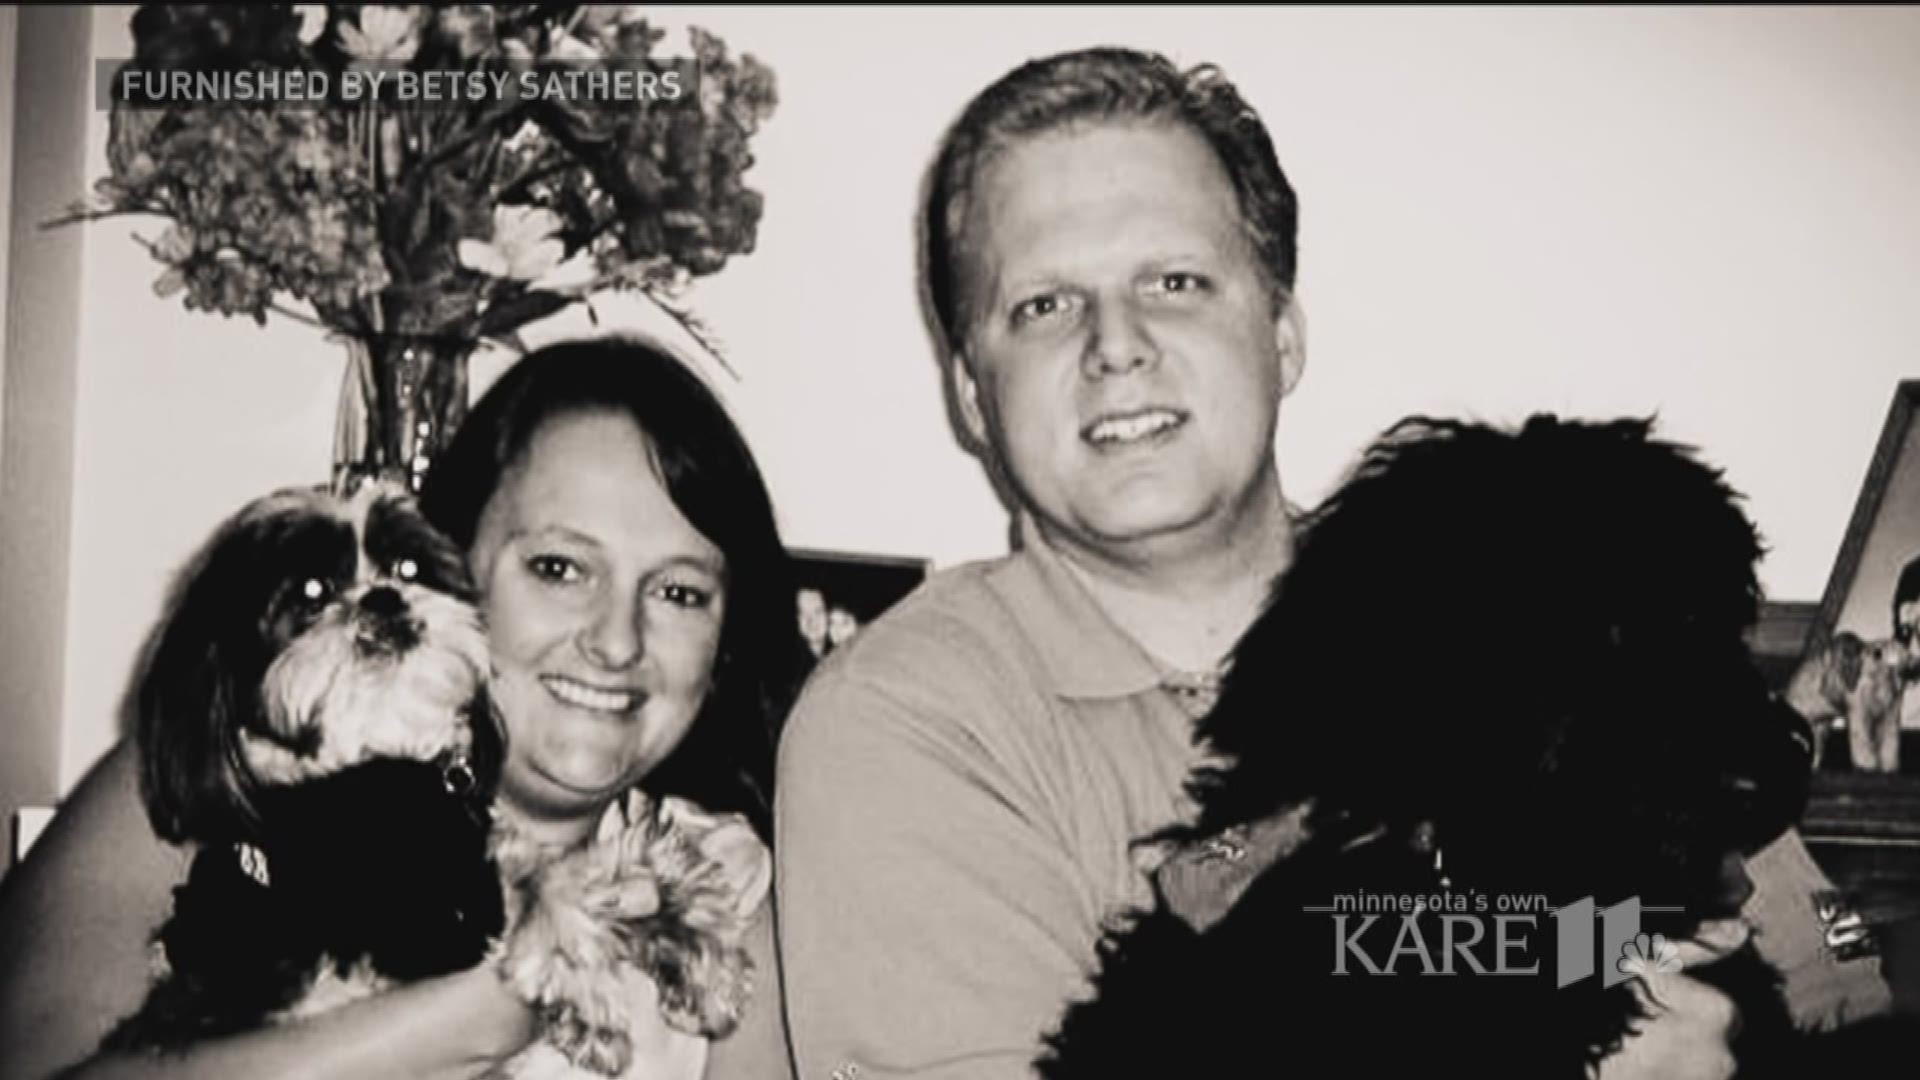 Betsy Sathers expected her life would follow a traditional script: first, marriage; later, motherhood. But the events of Aug. 1, 2007 changed that plan. Today, she's rebuilt in a way she never imagined. http://kare11.tv/2uPIxRH